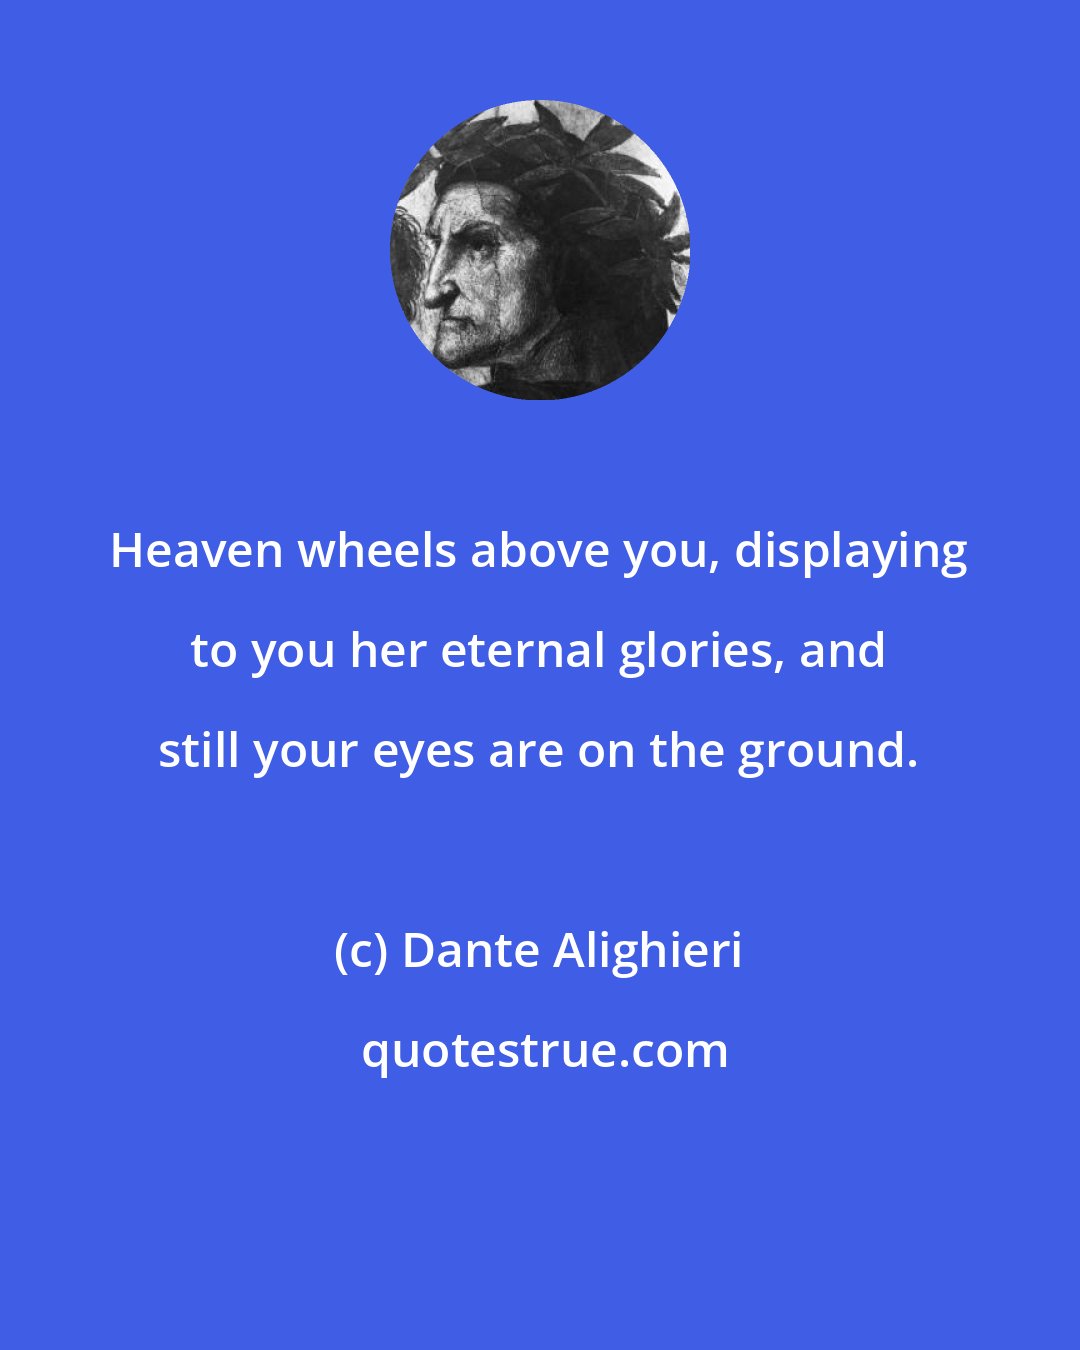 Dante Alighieri: Heaven wheels above you, displaying to you her eternal glories, and still your eyes are on the ground.